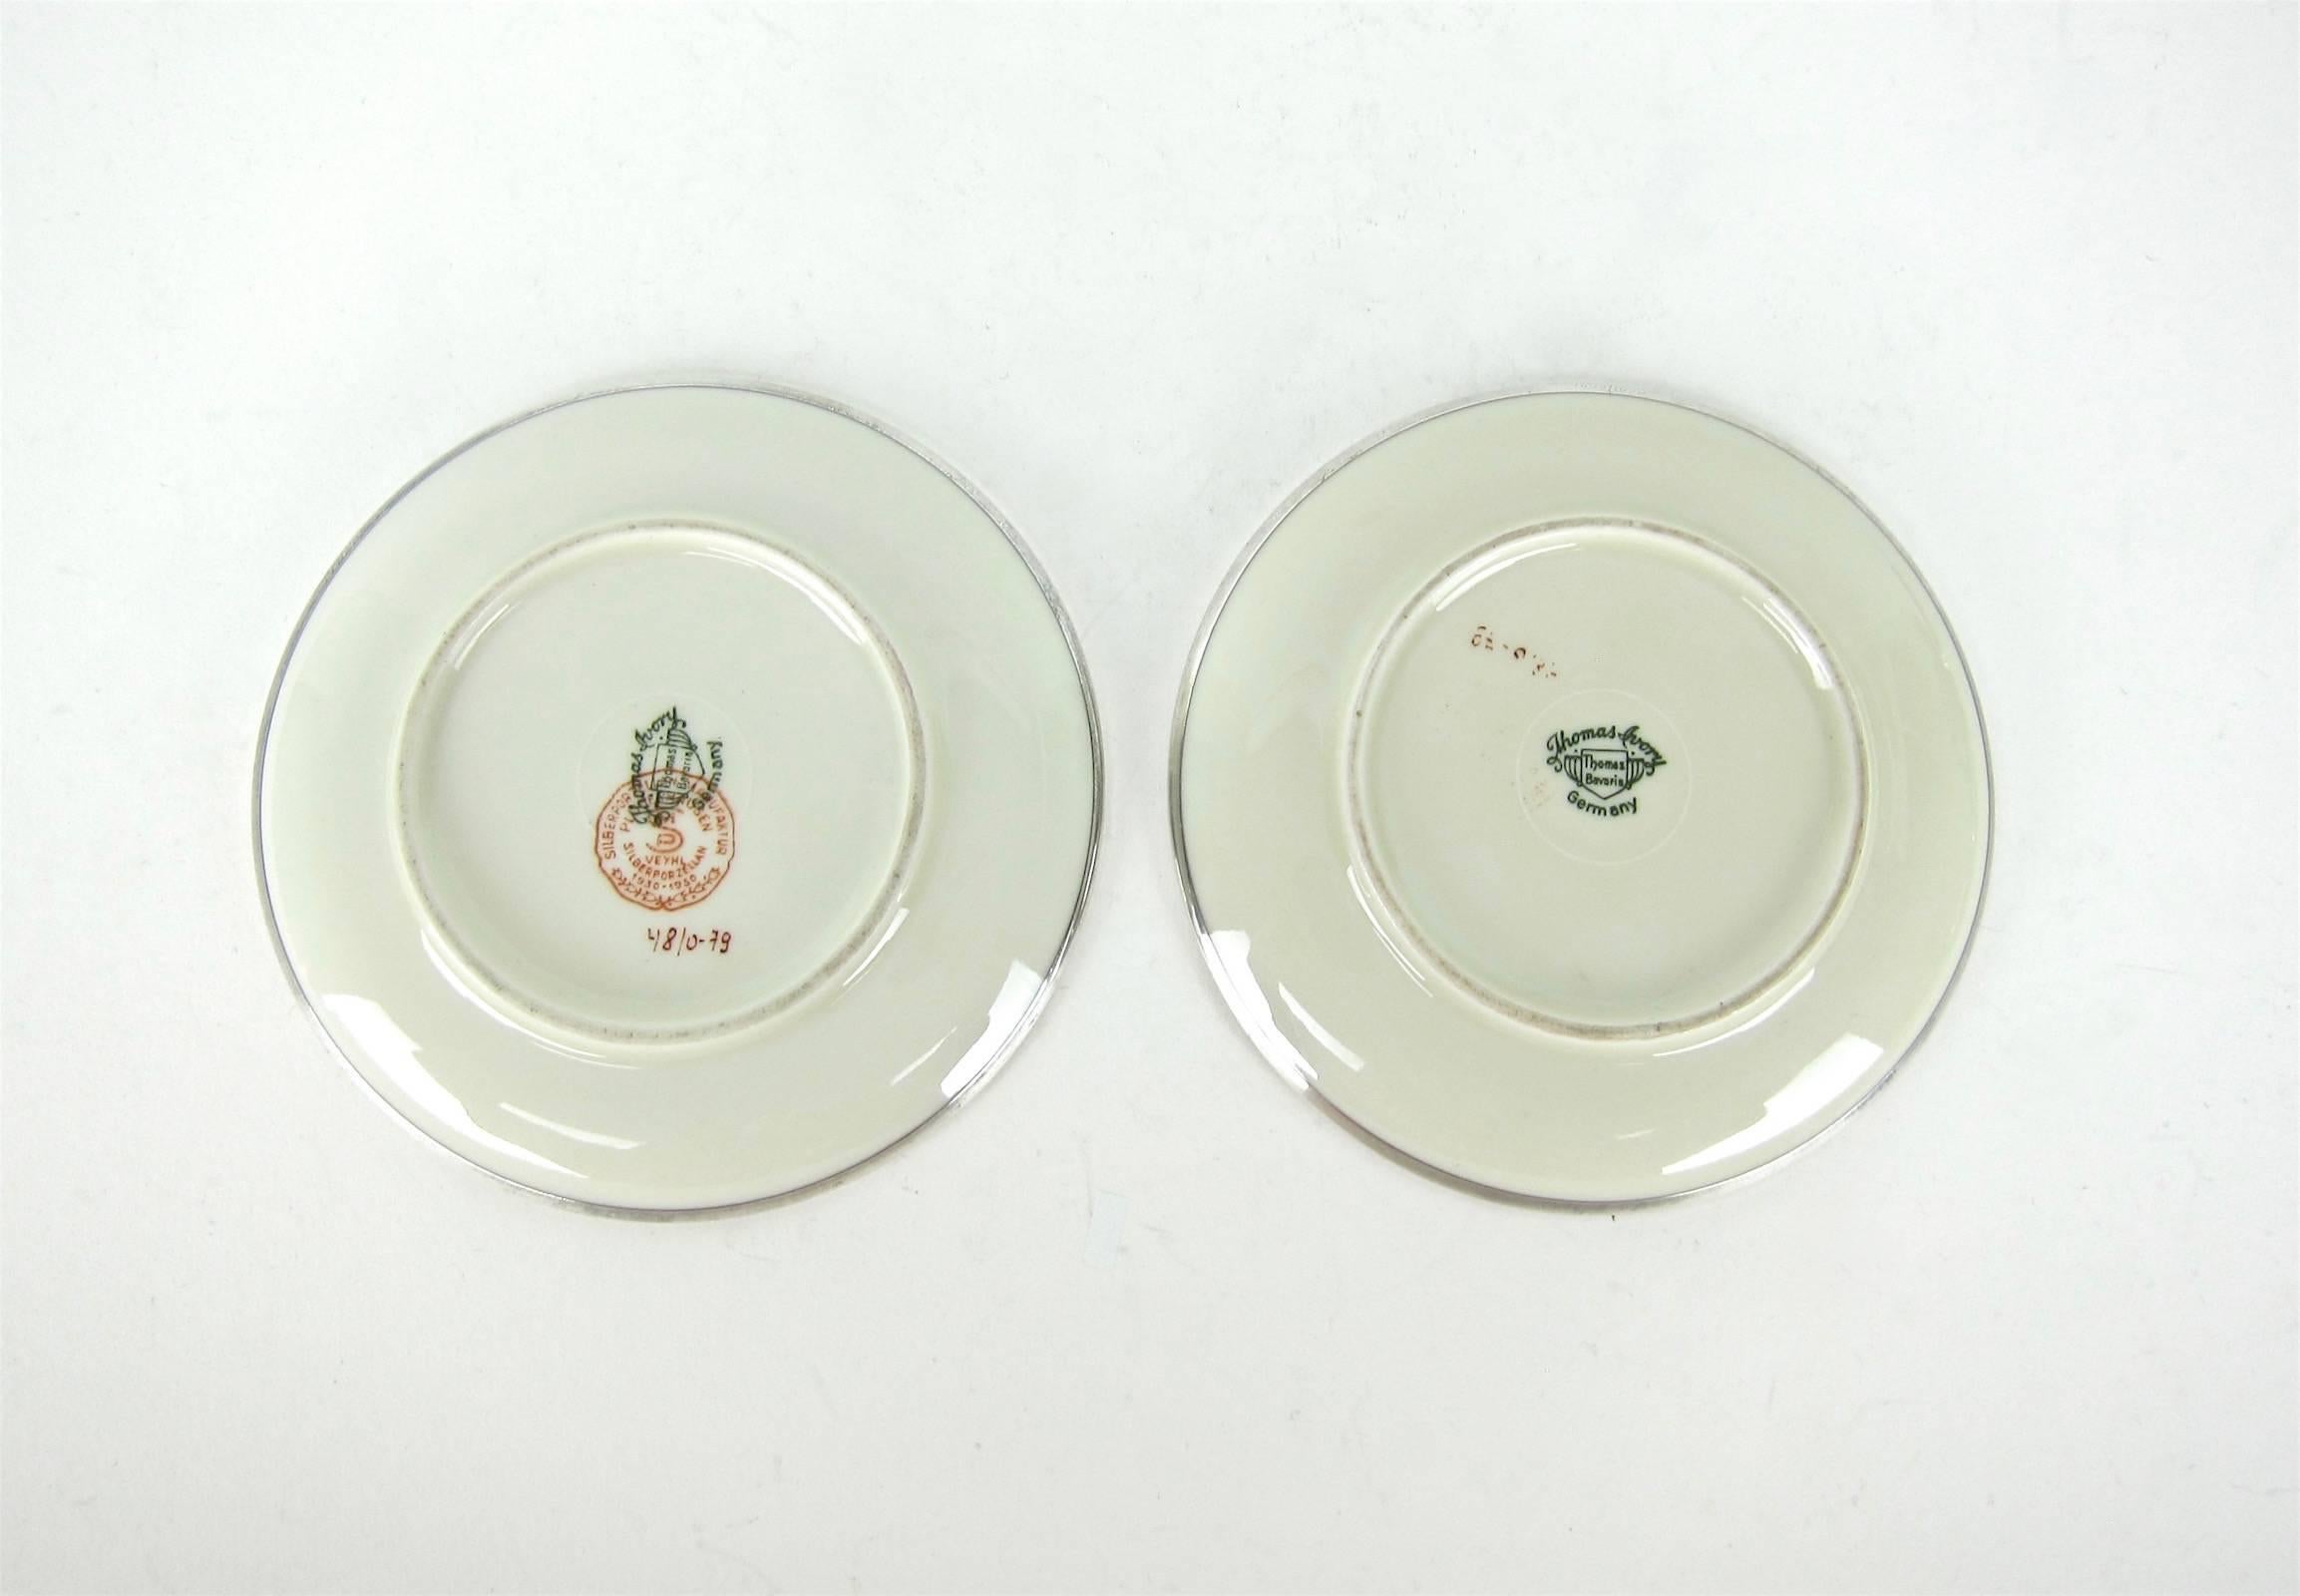 Sterling Silver Manfred Veyhl Silver Overlay Vanity or Smoking Set in Thomas Ivory Porcelain